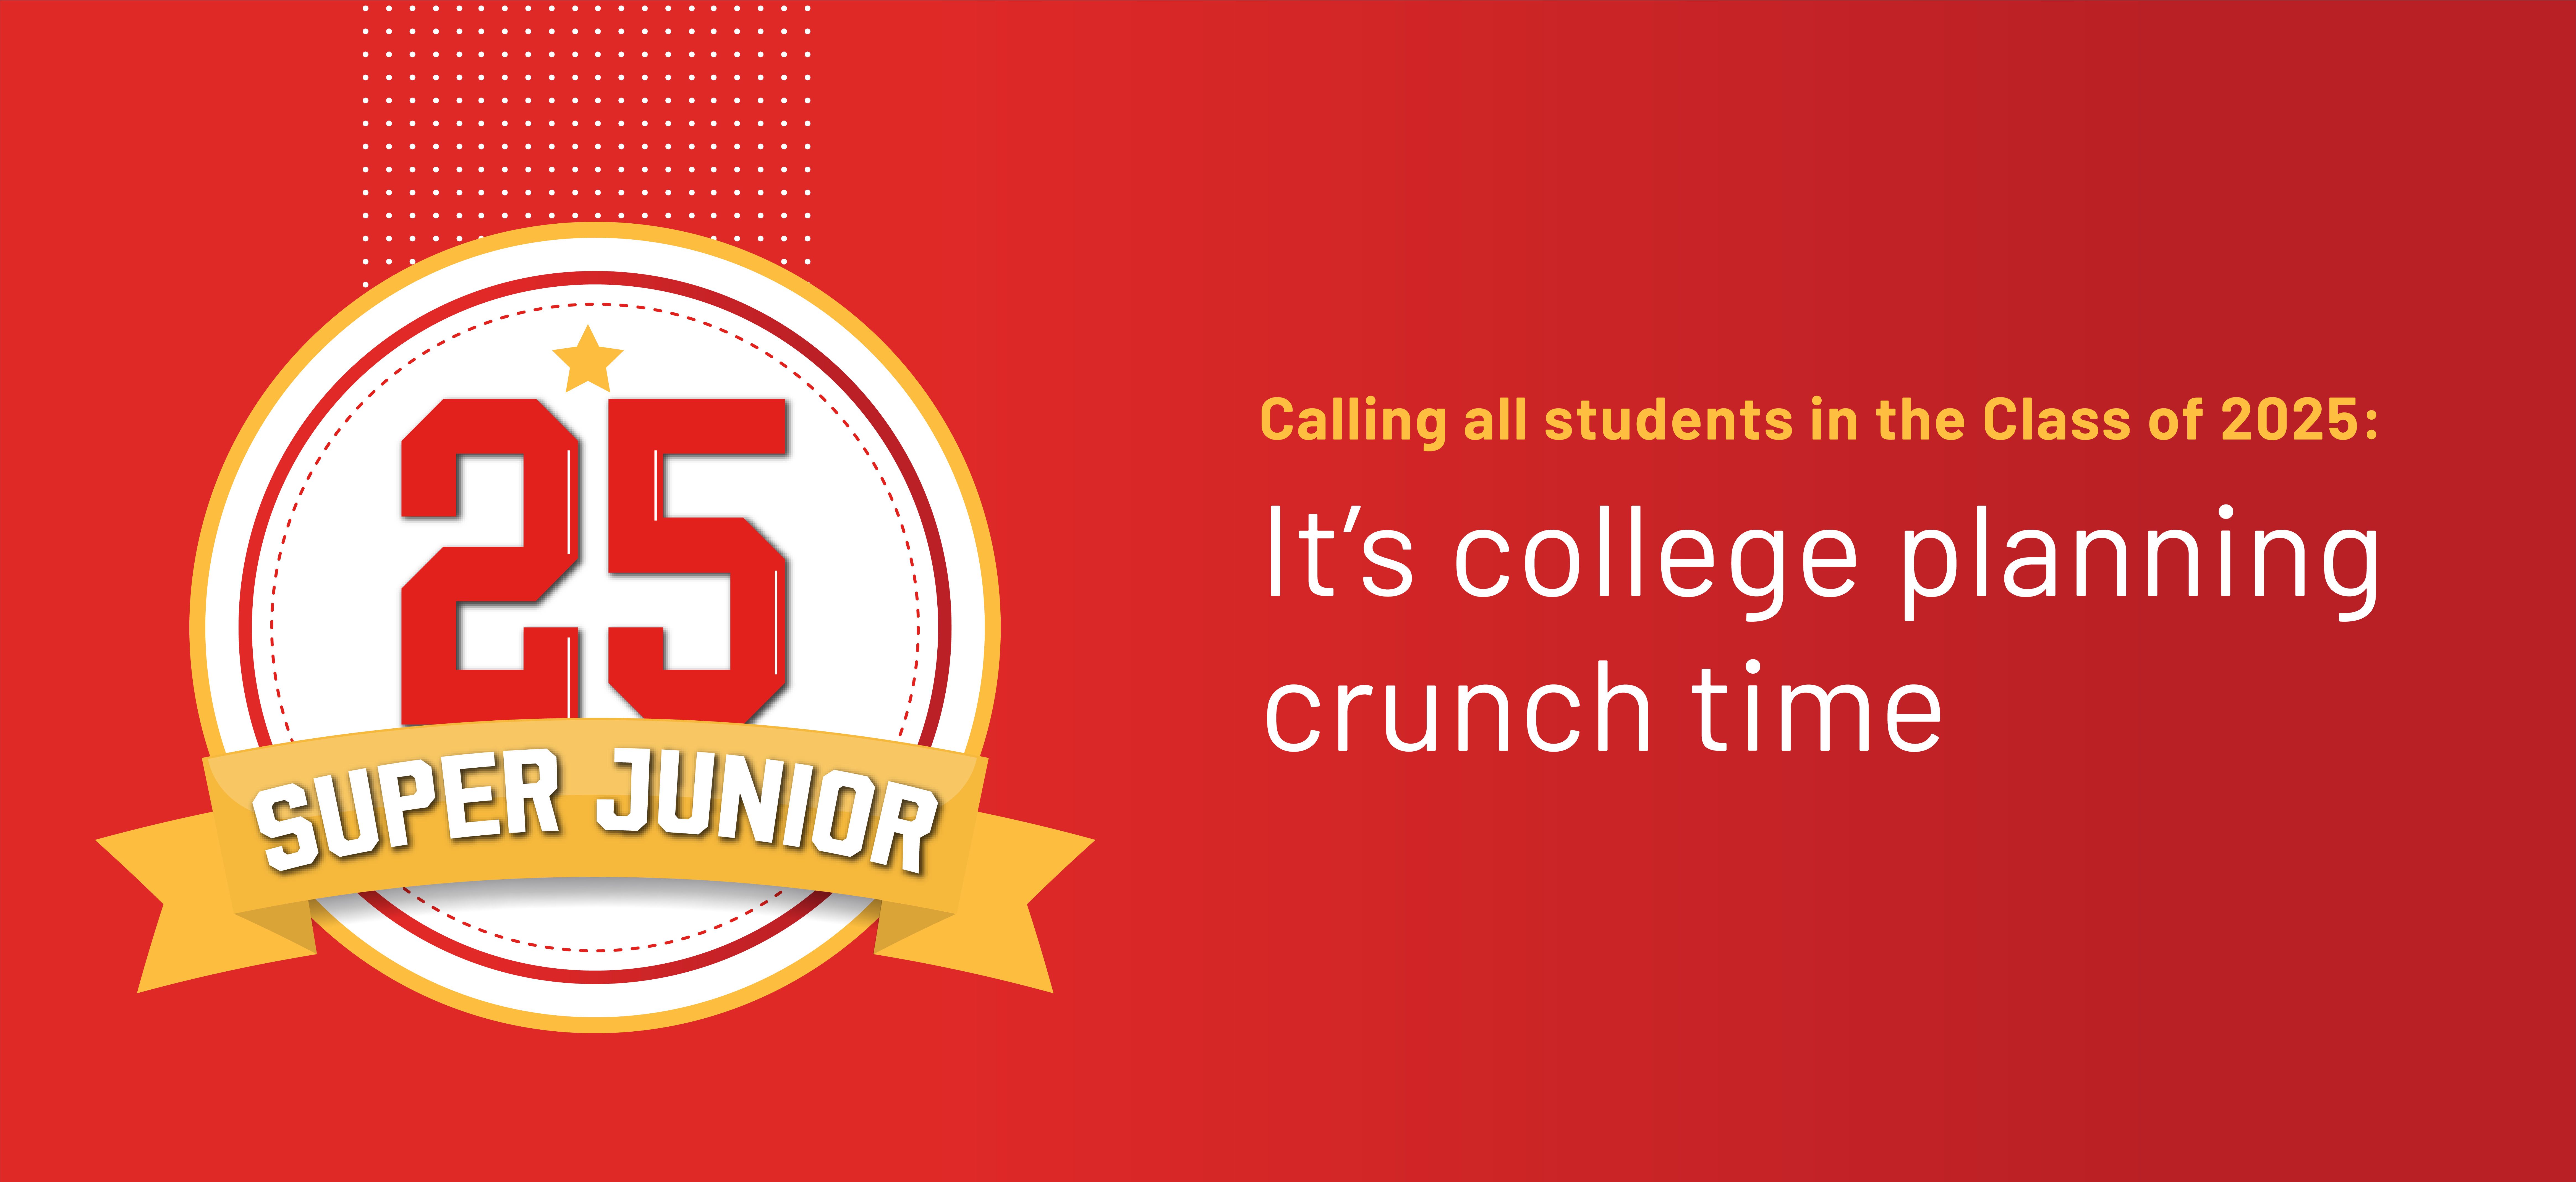 Calling All Super Juniors: It’s College Planning Crunch Time